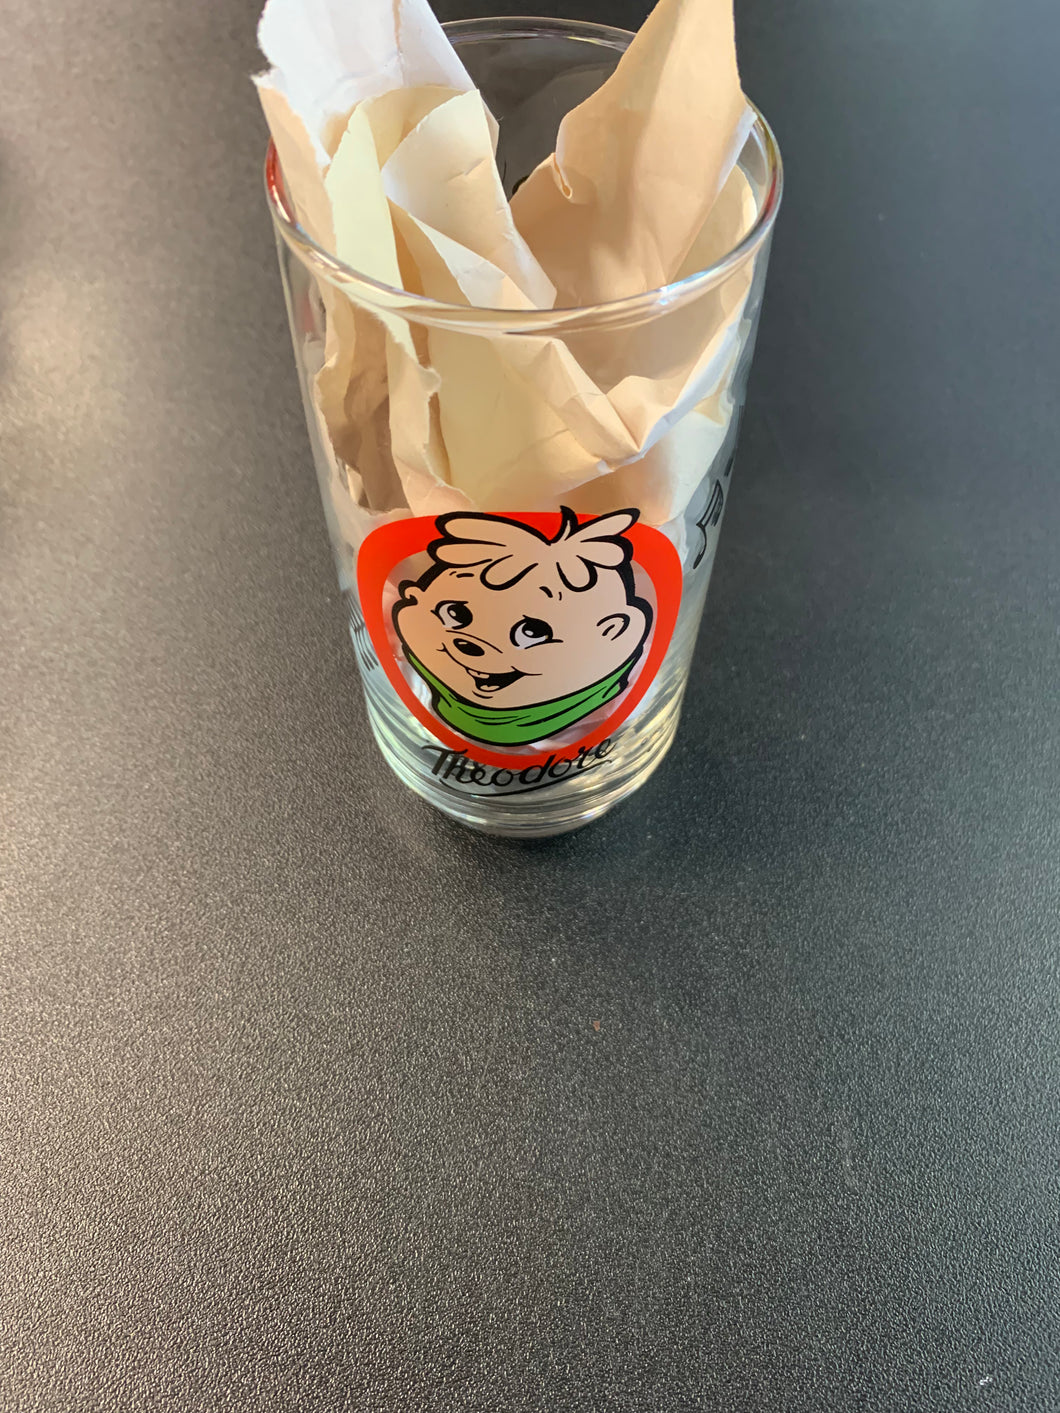 ALVIN AND THE CHIPMUNKS THEODORE 1985 DRINKING GLASS